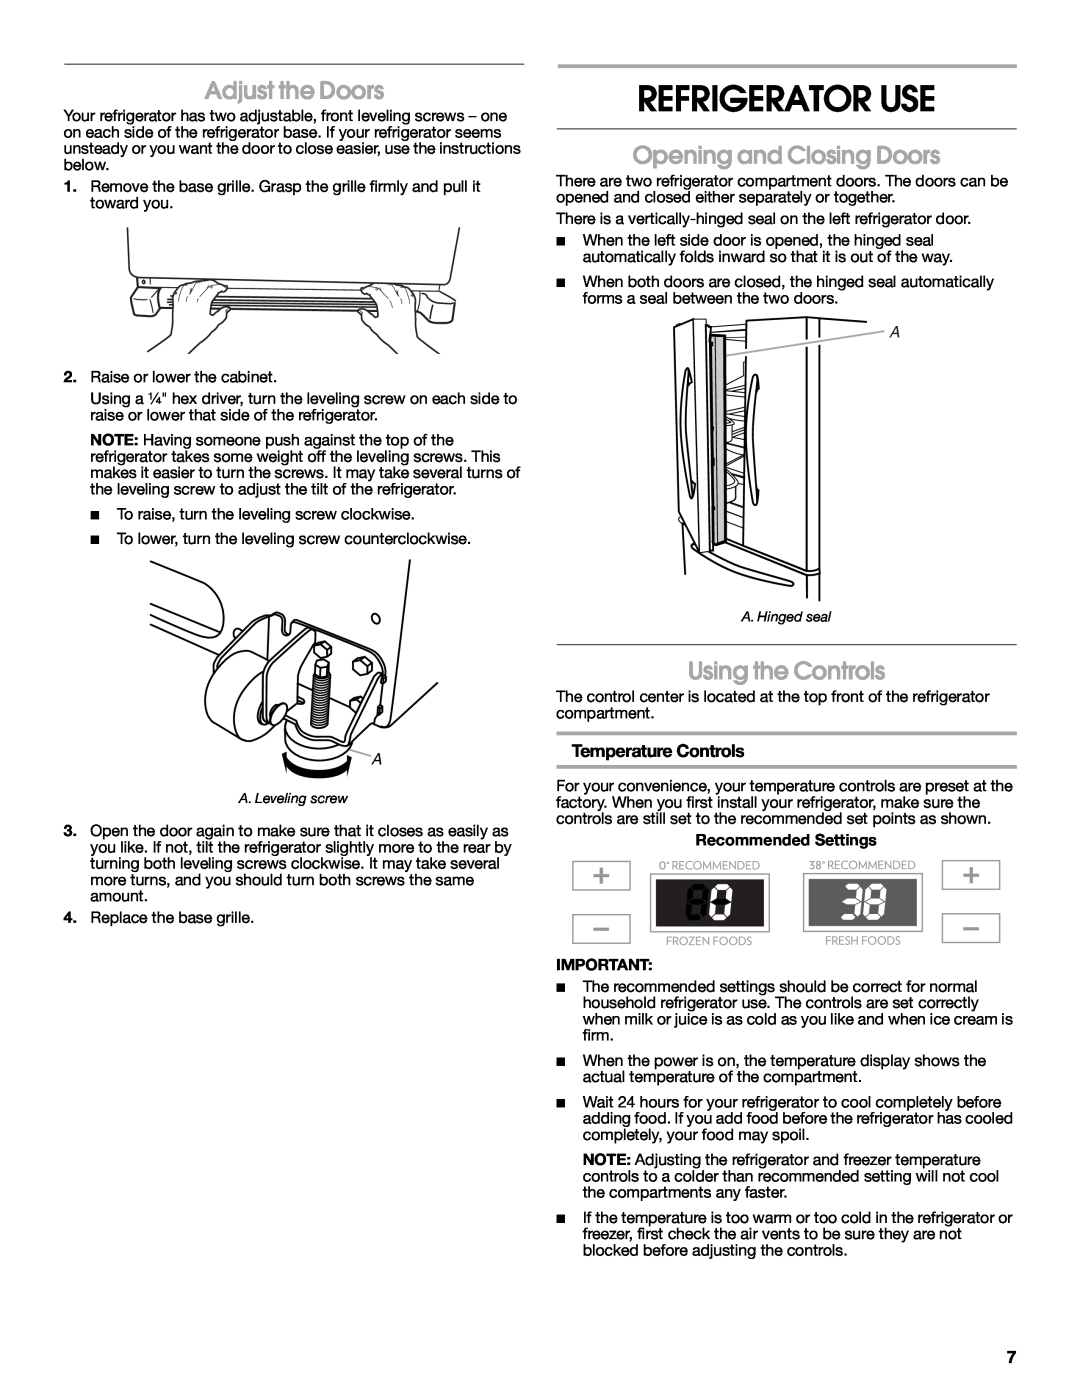 Jenn-Air W10276070A Refrigerator Use, Adjust the Doors, Opening and Closing Doors, Using the Controls 